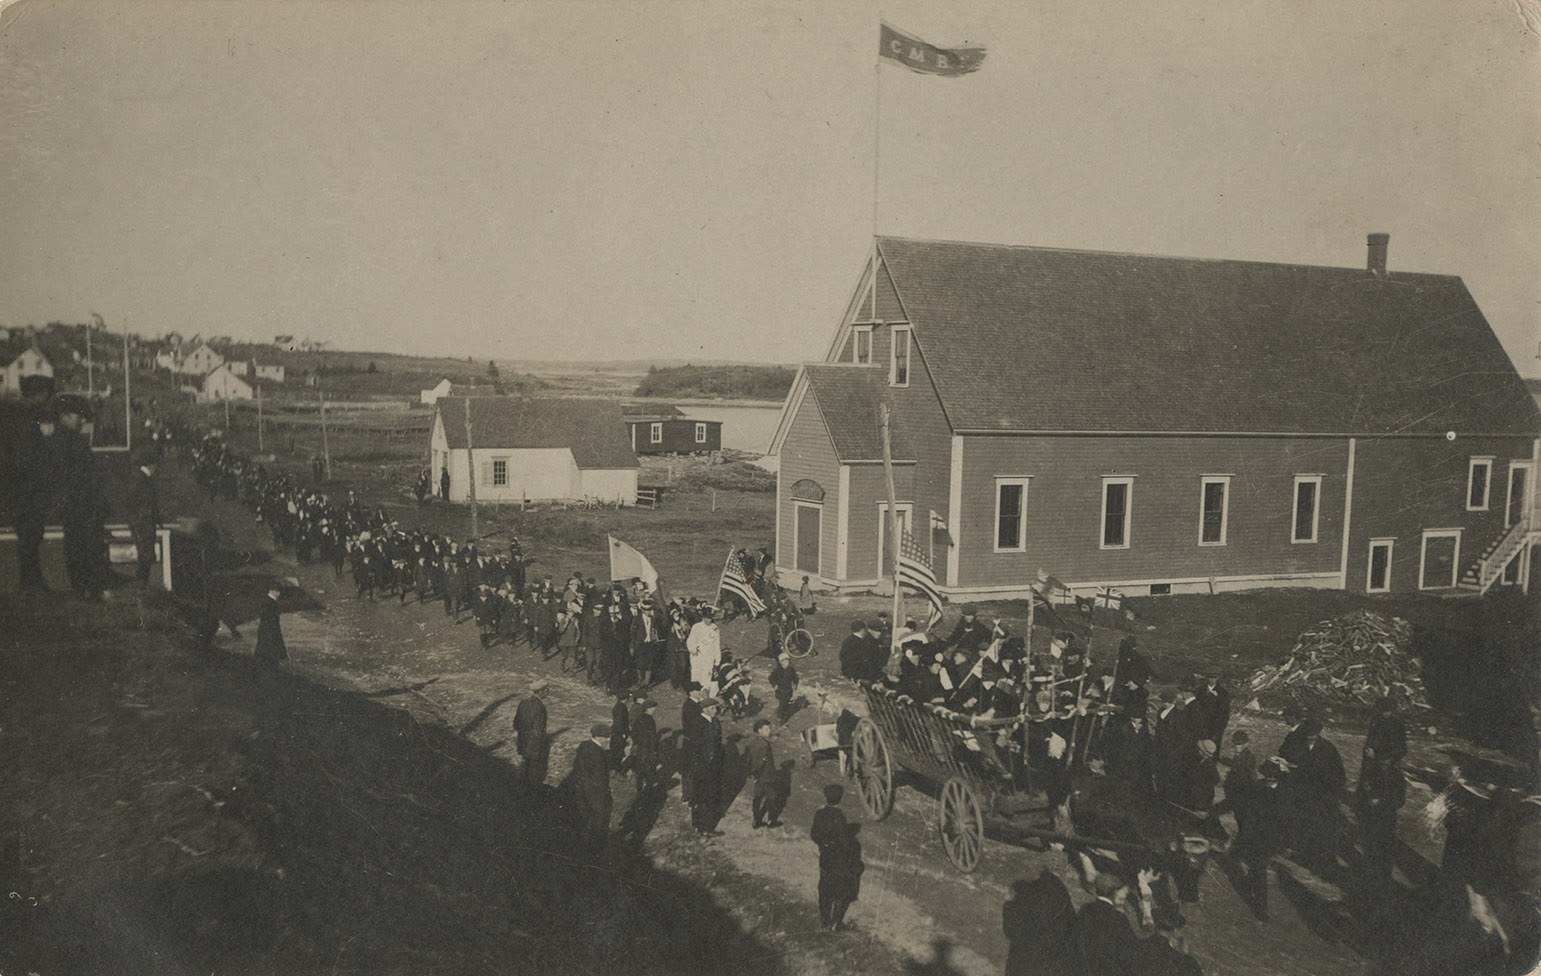 communityalbums - Parade to celebrate the end of World War I of 1914-1918